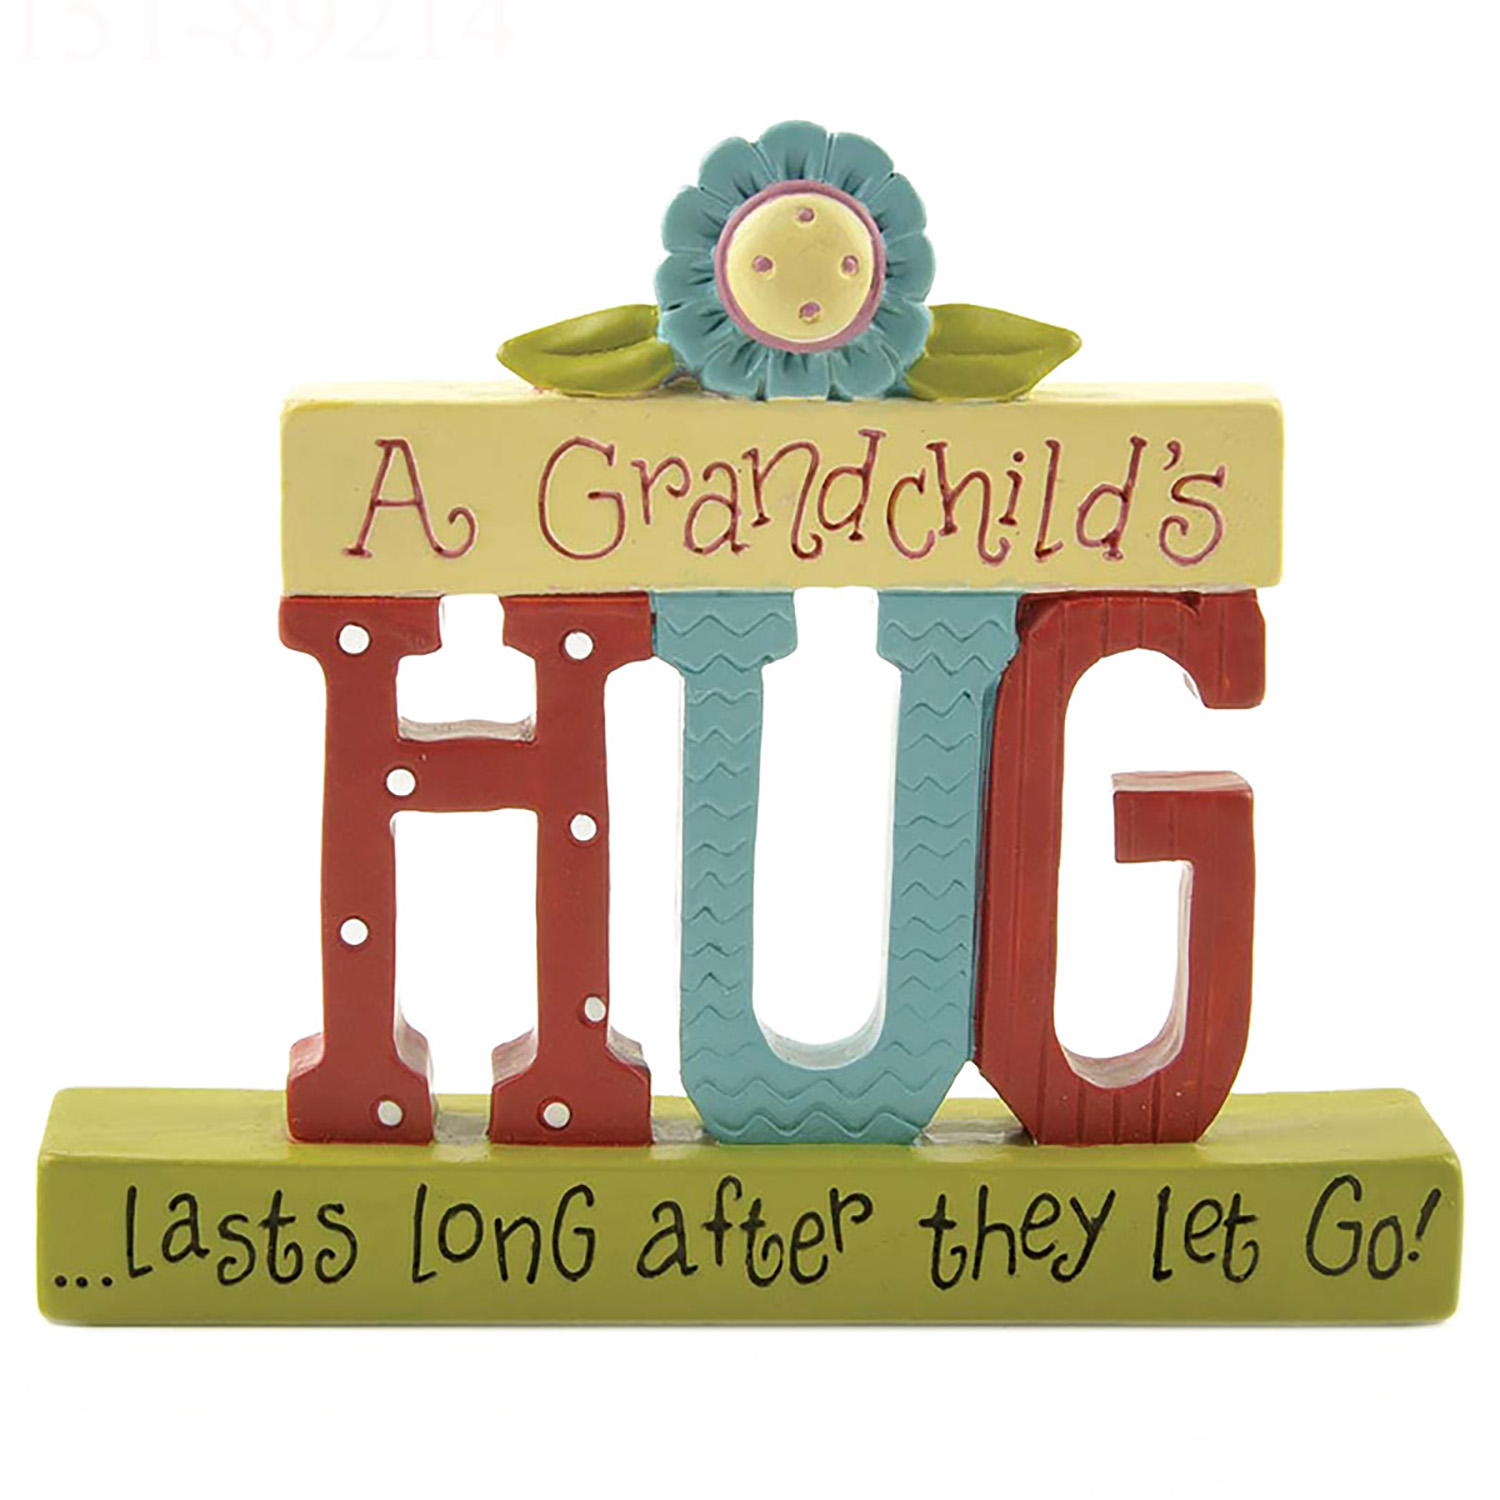 A Grandchild's Hug Lasts Long After They Let Go Resin Tabletop Sign - Heartwarming Decorative Gift for Grandparents, Perfect for Grandparent's Day, Mother's Day, Father's Day, or Any Special Occasion151-89214